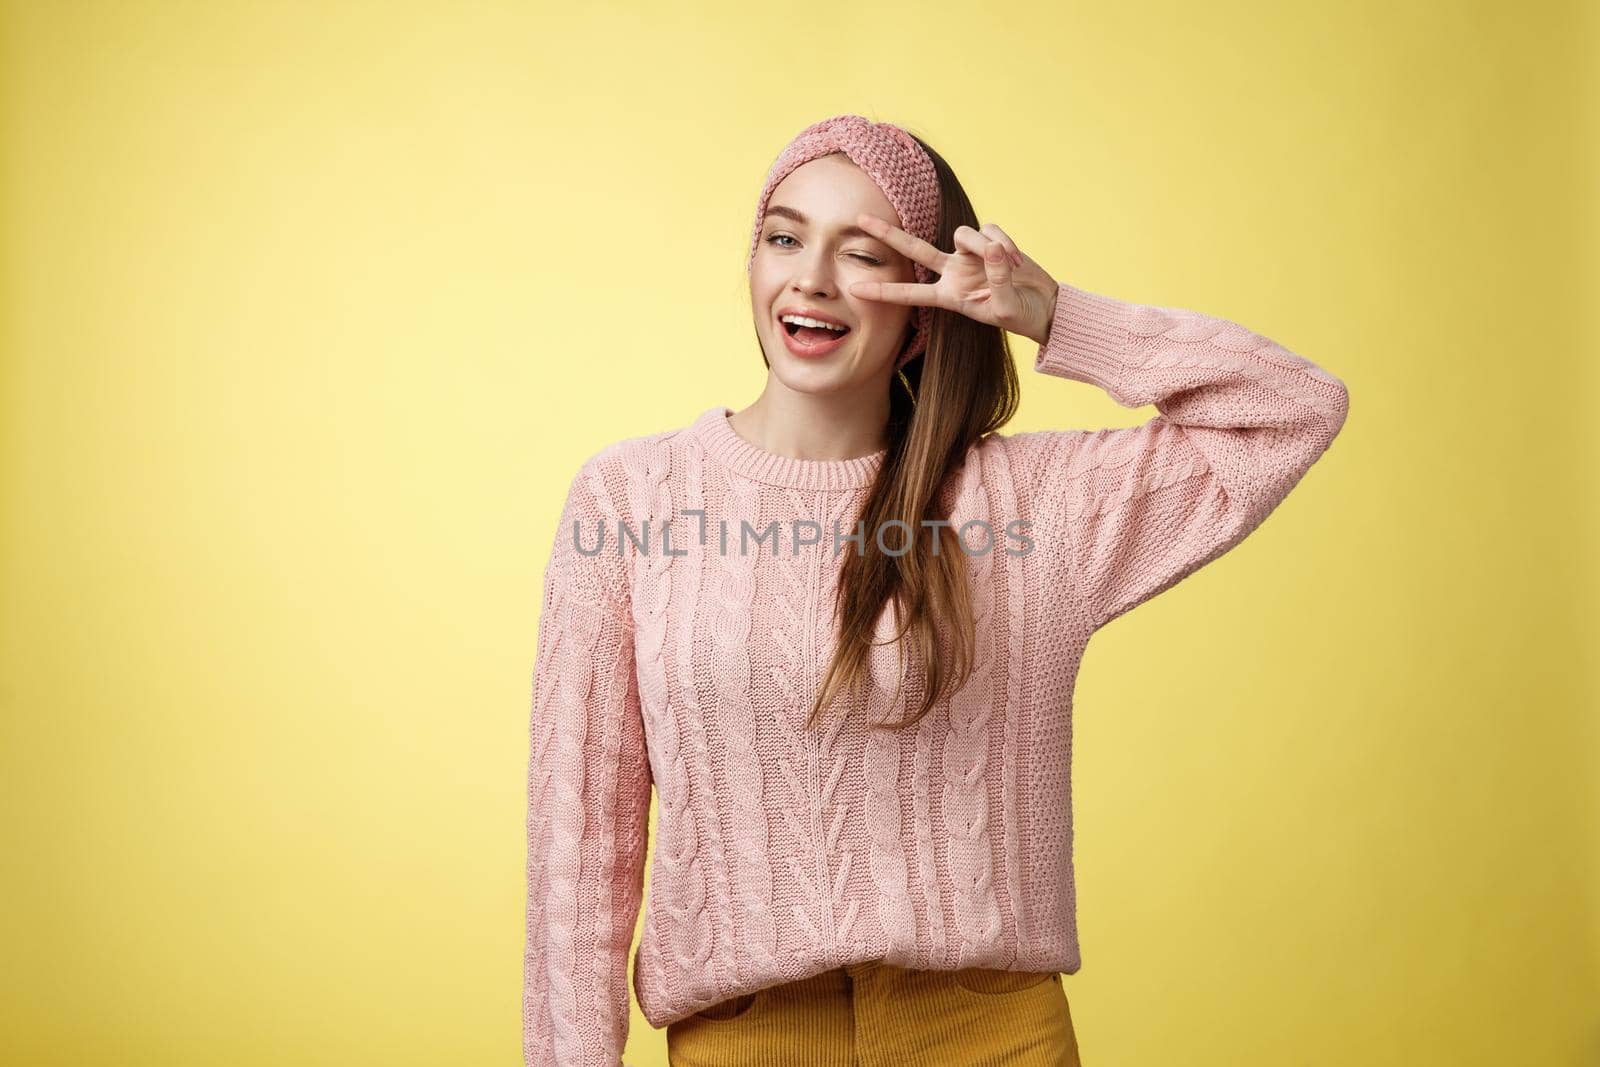 Cheerful happy glamour young european woman in pink knitted sweater, wearing headband, winking flirty and cute, showing victory or pease sign over eye, feeling excited and joyful over yellow wall.